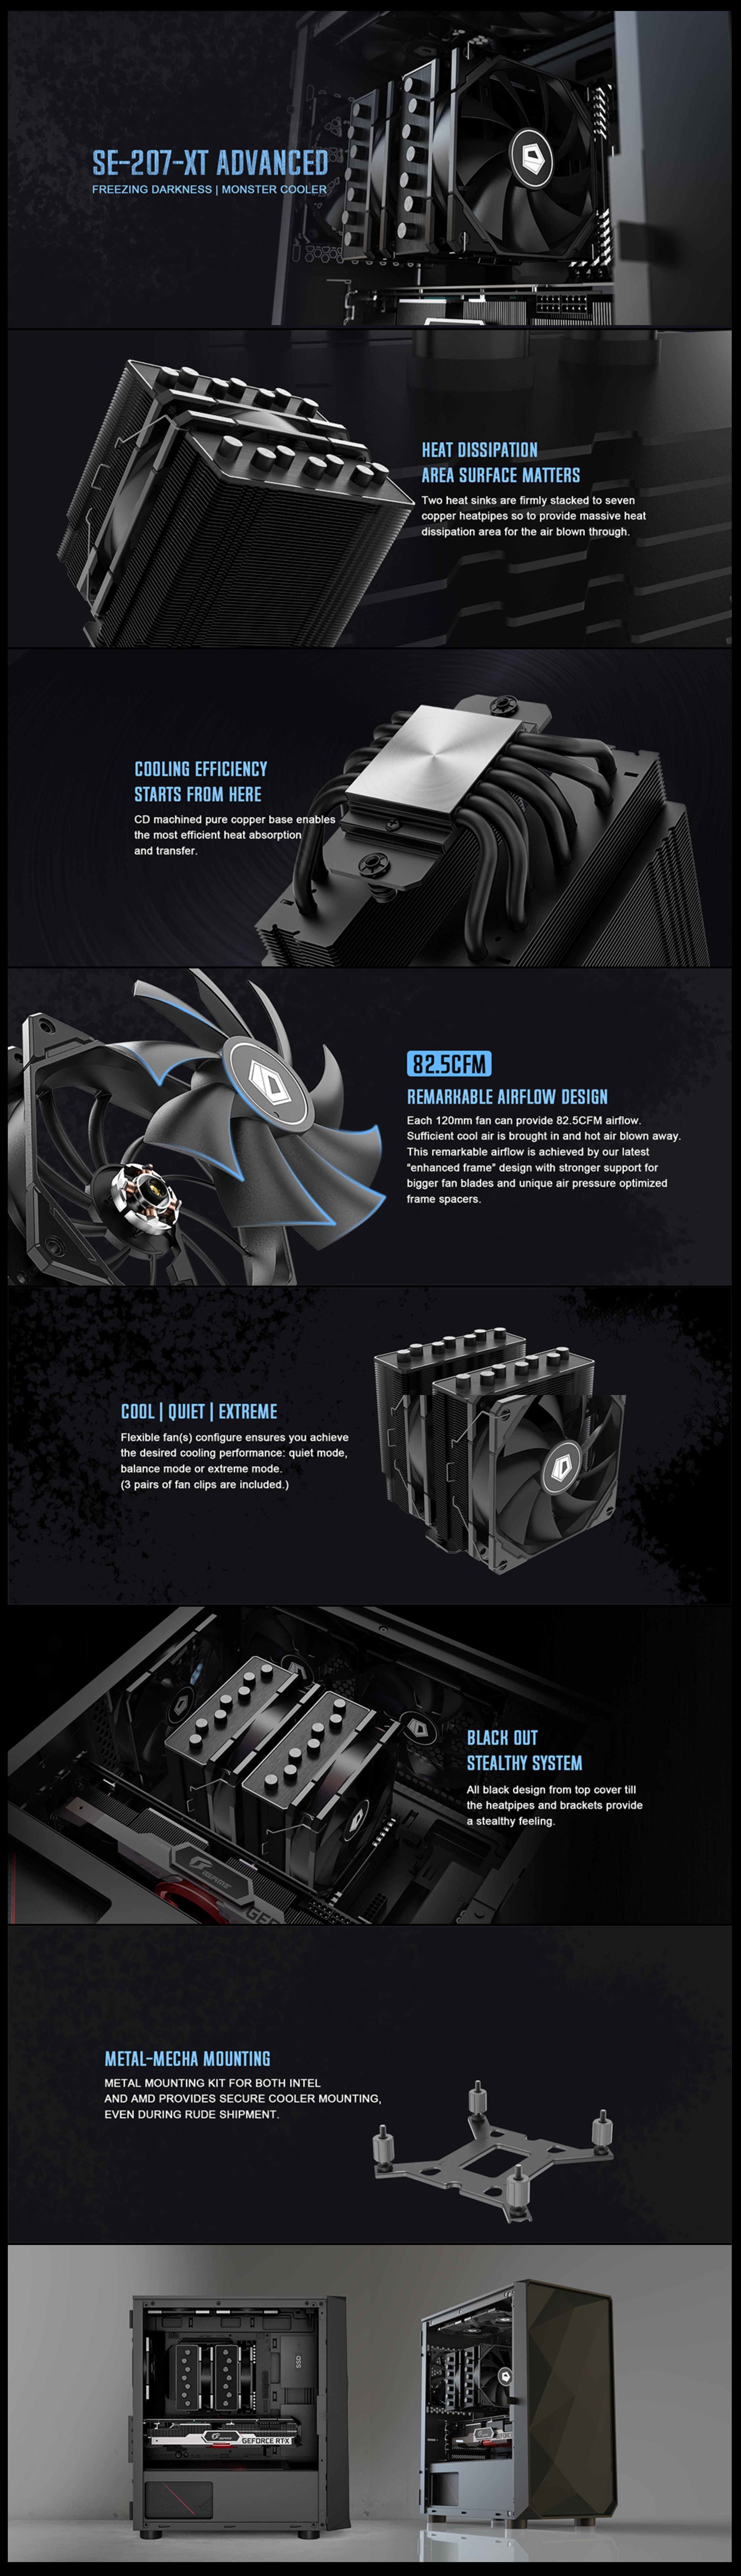 A large marketing image providing additional information about the product ID-COOLING SE-207-XT Advanced CPU Cooler - Additional alt info not provided